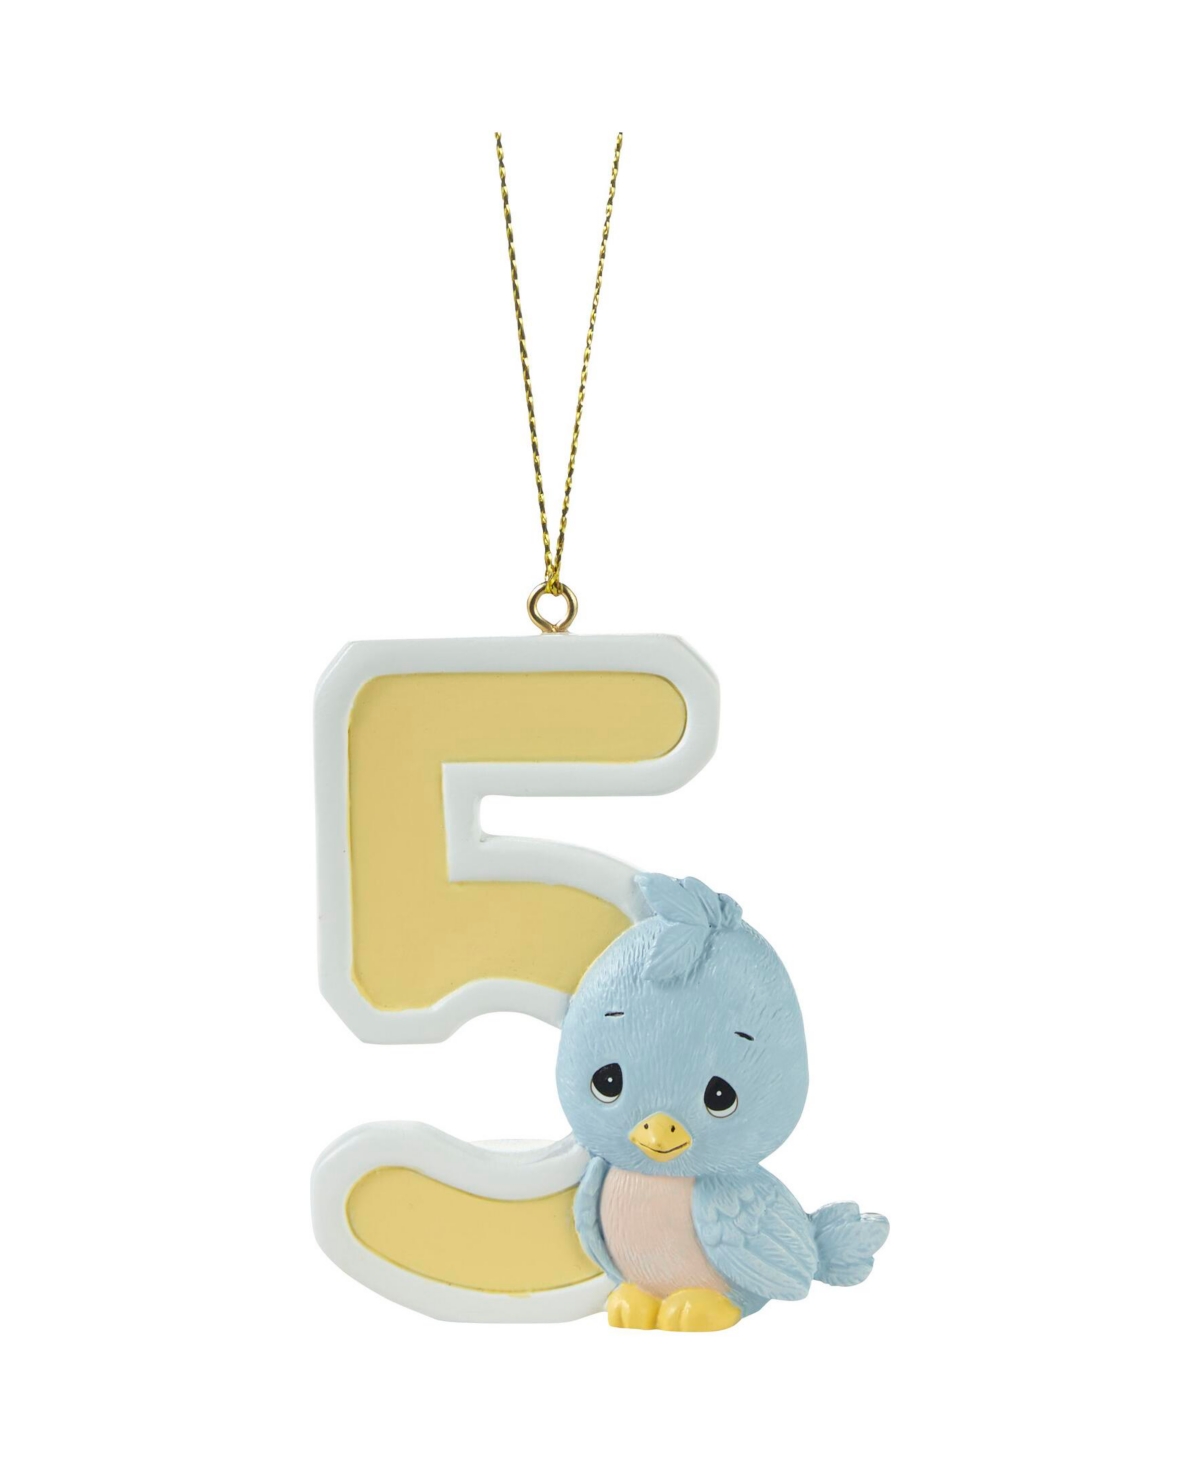 Precious Moments This Year You're Five Resin Ornament In Multicolored